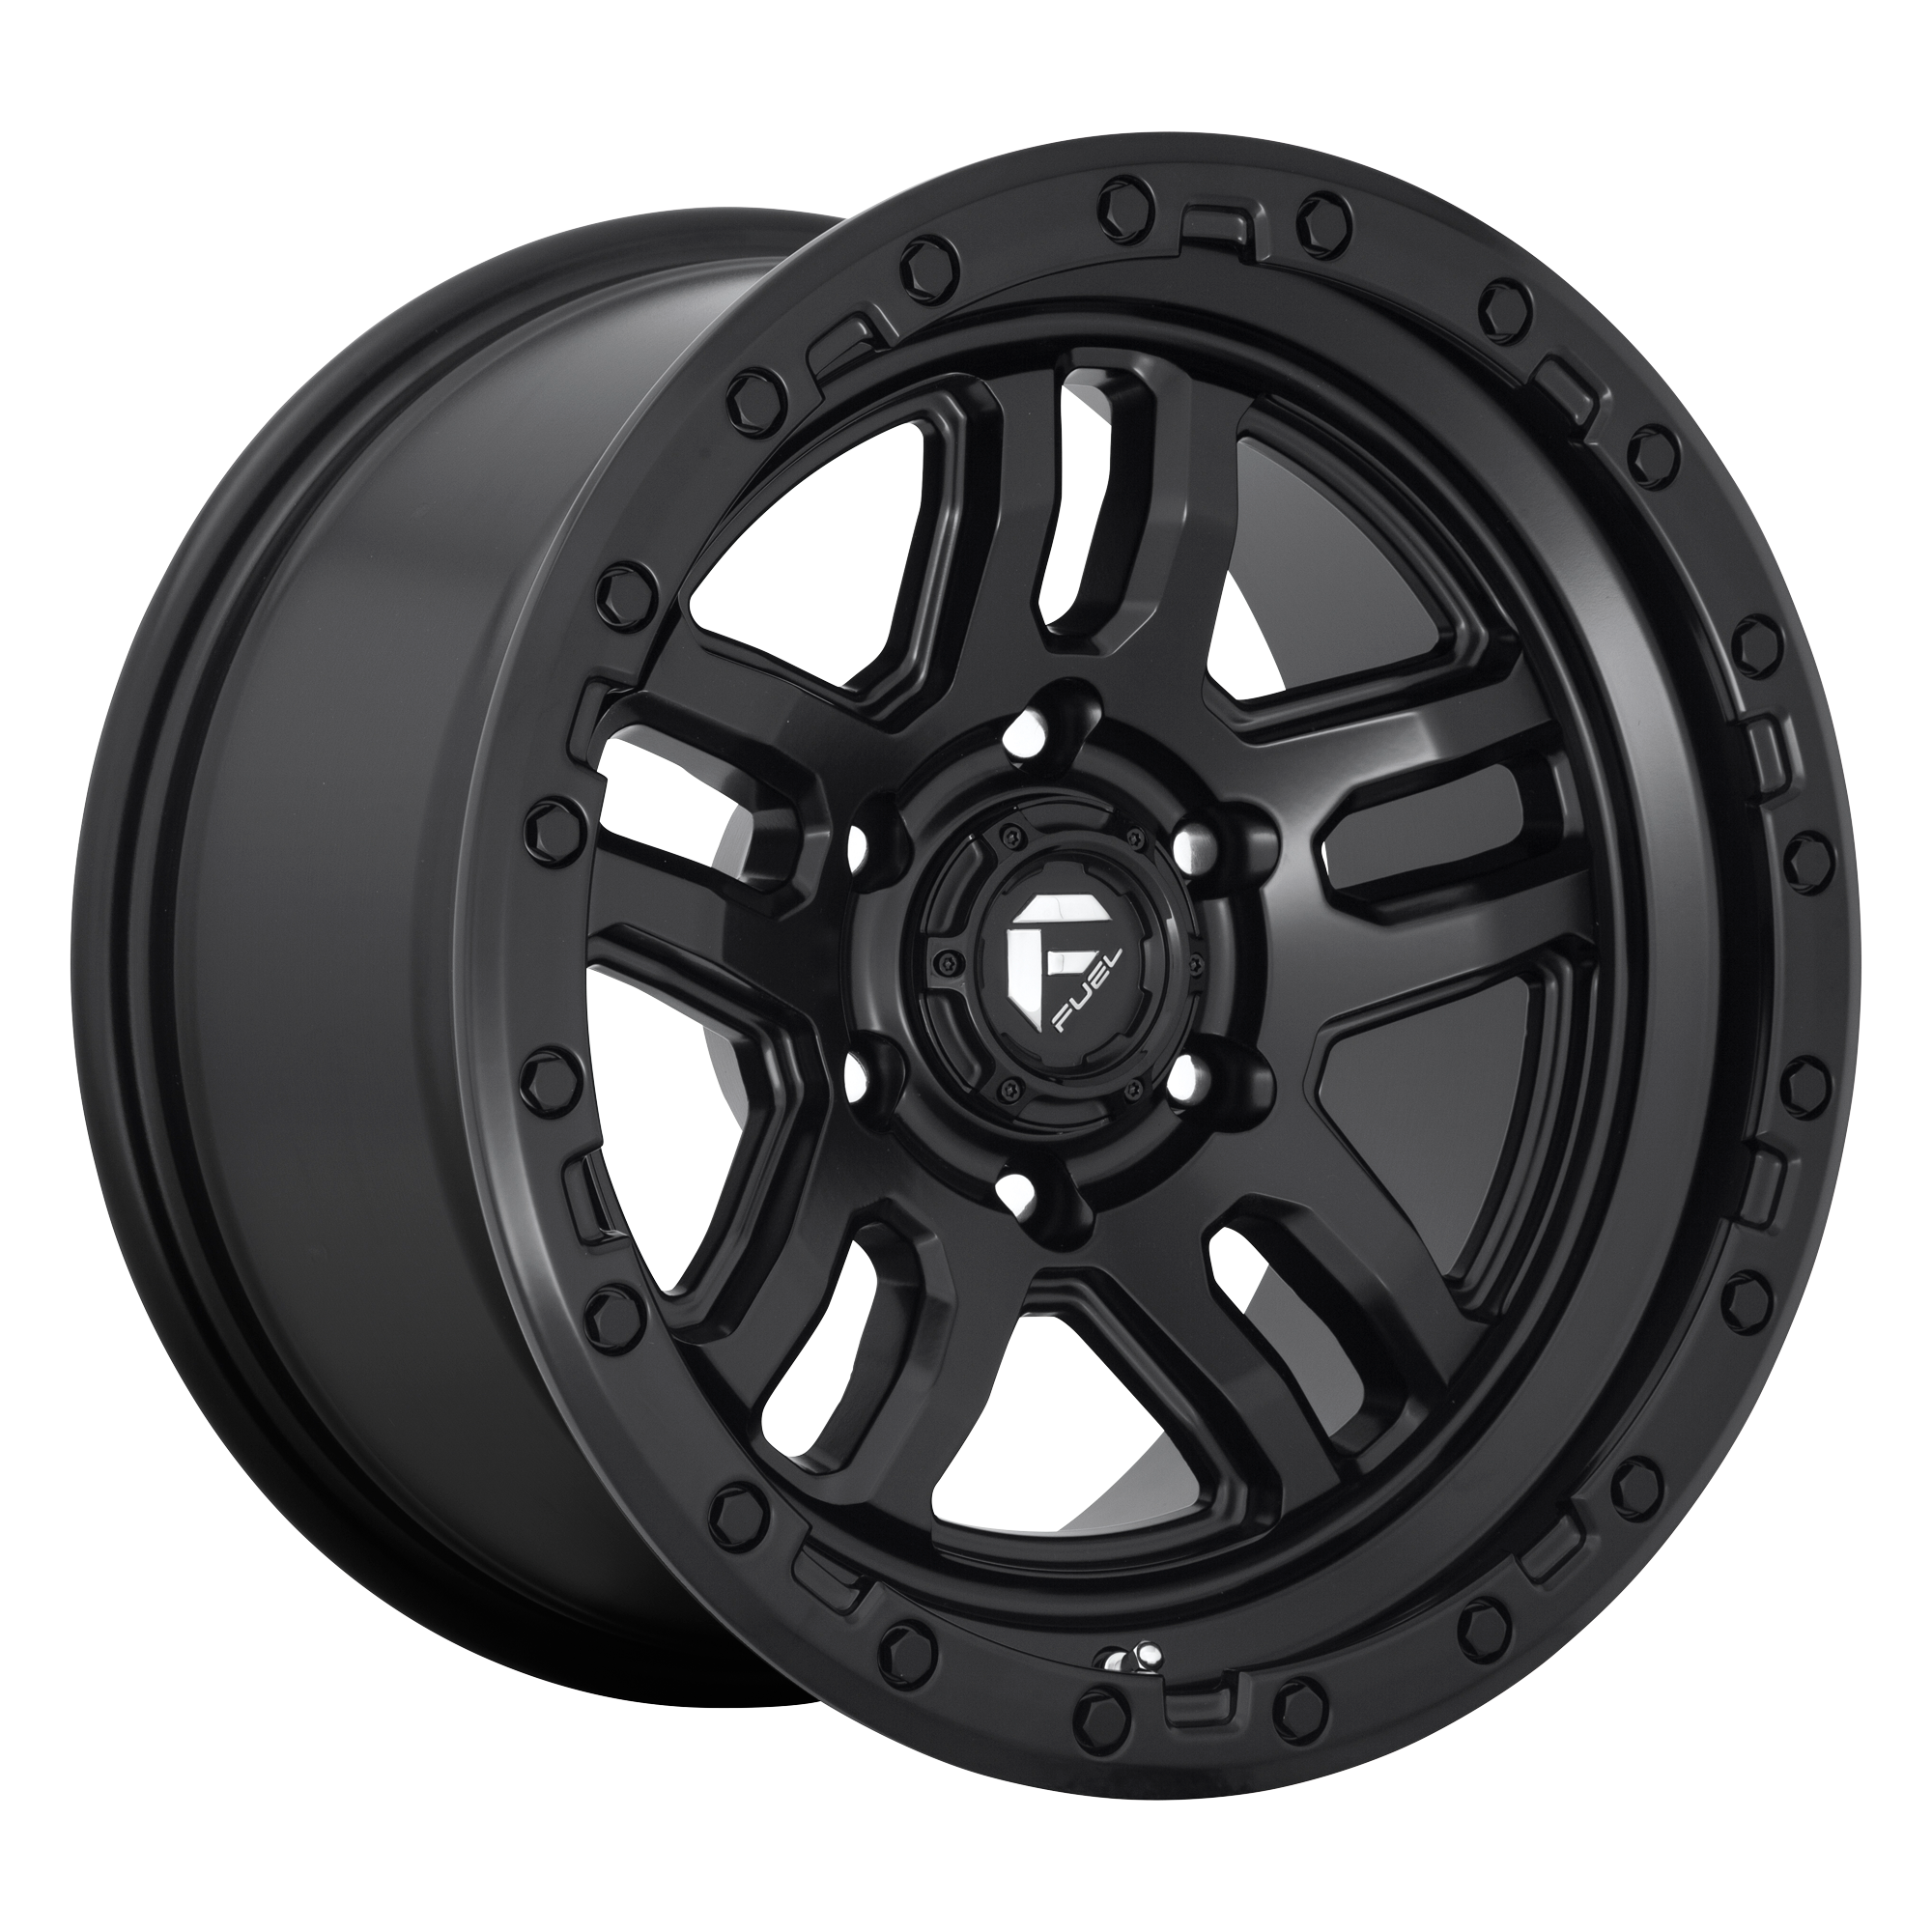 AMMO 17x9 6x139.70 MATTE BLACK (1 mm) - Tires and Engine Performance